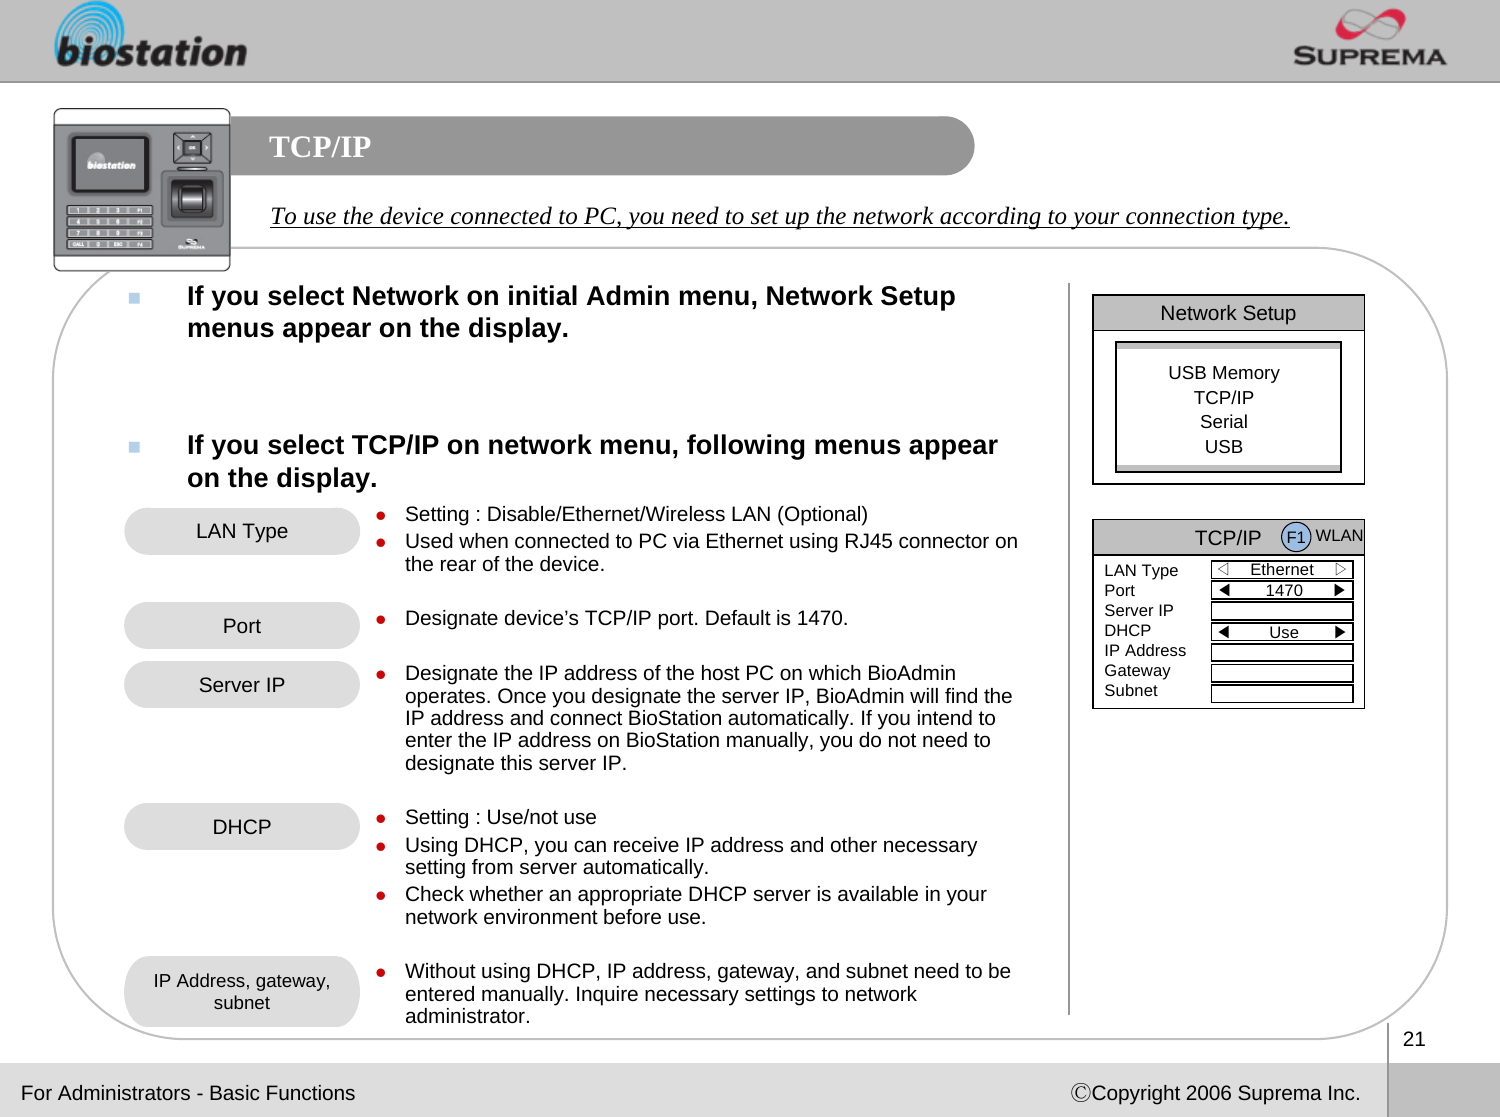 21ⒸCopyright 2006 Suprema Inc.TCP/IPIf you select Network on initial Admin menu, Network Setup menus appear on the display. If you select TCP/IP on network menu, following menus appear on the display. To use the device connected to PC, you need to set up the network according to your connection type. Network SetupUSB MemoryTCP/IPSerialUSBLAN Type zSetting : Disable/Ethernet/Wireless LAN (Optional)zUsed when connected to PC via Ethernet using RJ45 connector on the rear of the device. zDesignate device’s TCP/IP port. Default is 1470.zDesignate the IP address of the host PC on which BioAdminoperates. Once you designate the server IP, BioAdmin will find the IP address and connect BioStation automatically. If you intend to enter the IP address on BioStation manually, you do not need to designate this server IP. zSetting : Use/not usezUsing DHCP, you can receive IP address and other necessary setting from server automatically. zCheck whether an appropriate DHCP server is available in your network environment before use. zWithout using DHCP, IP address, gateway, and subnet need to be entered manually. Inquire necessary settings to network administrator. PortDHCPIP Address, gateway, subnetFor Administrators - Basic FunctionsTCP/IP◁Ethernet    ▷LAN TypePortServer IPDHCPIP AddressGatewaySubnet◀1470      ▶◀Use       ▶F1 WLANServer IP